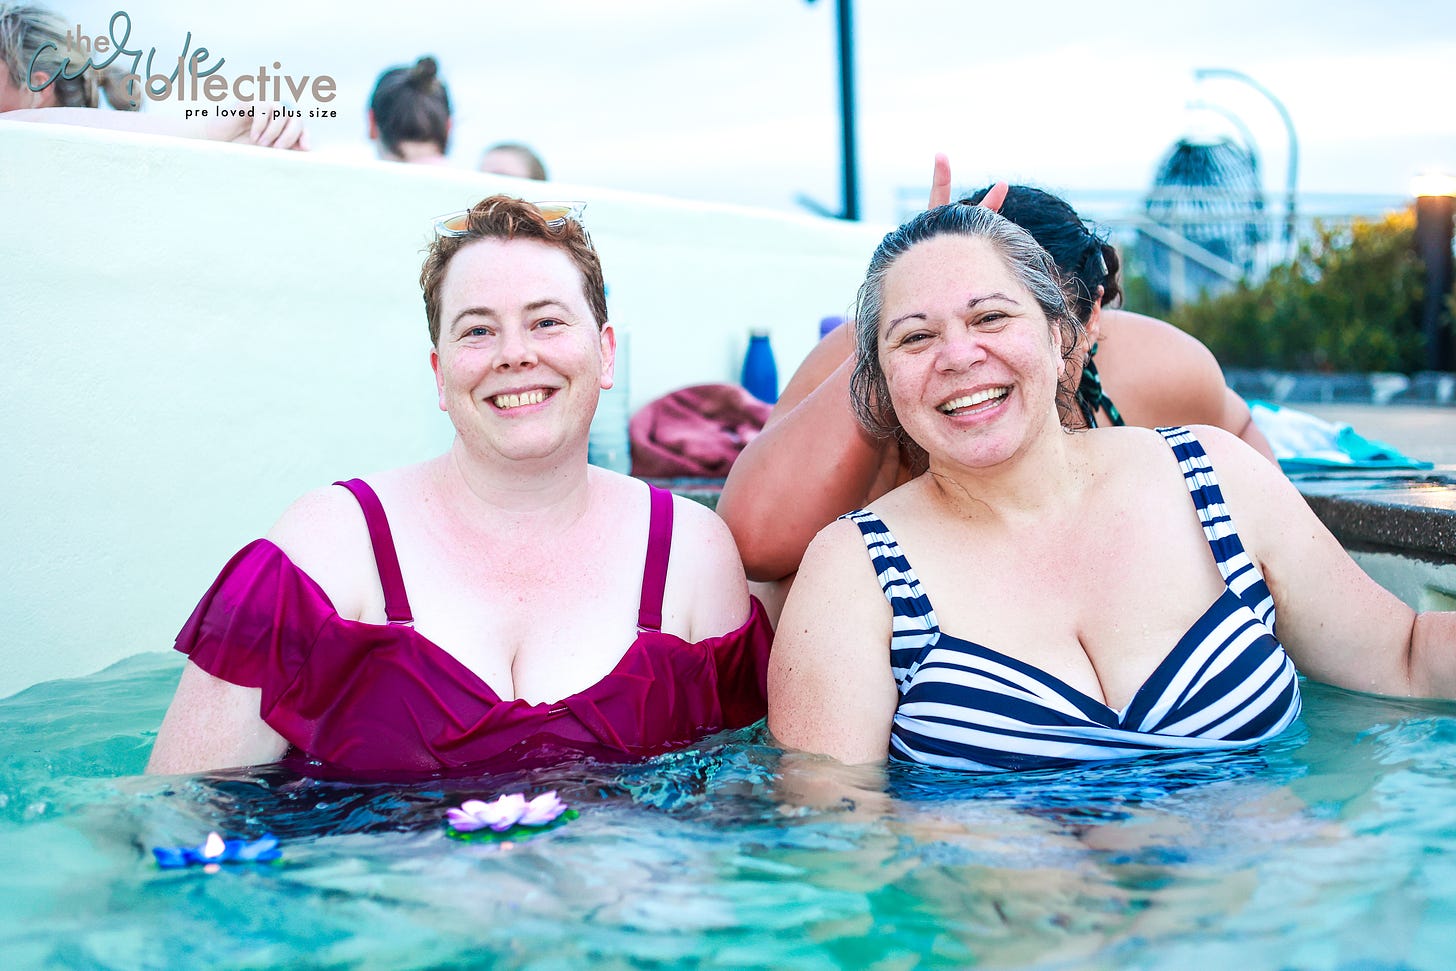 A fat Pakeha woman in a raspberry pink swimsuit with absurd and delightful ruffles, and a Māori woman in a navy and white striped swimsuit (so chic, super French) stand cleavage deep in water, clearly having a terrific time. Behind the white-and-navy suited woman, a MYSTERIOUS STRANGER has hidden her face, but holds up her fingers in bunny ears.